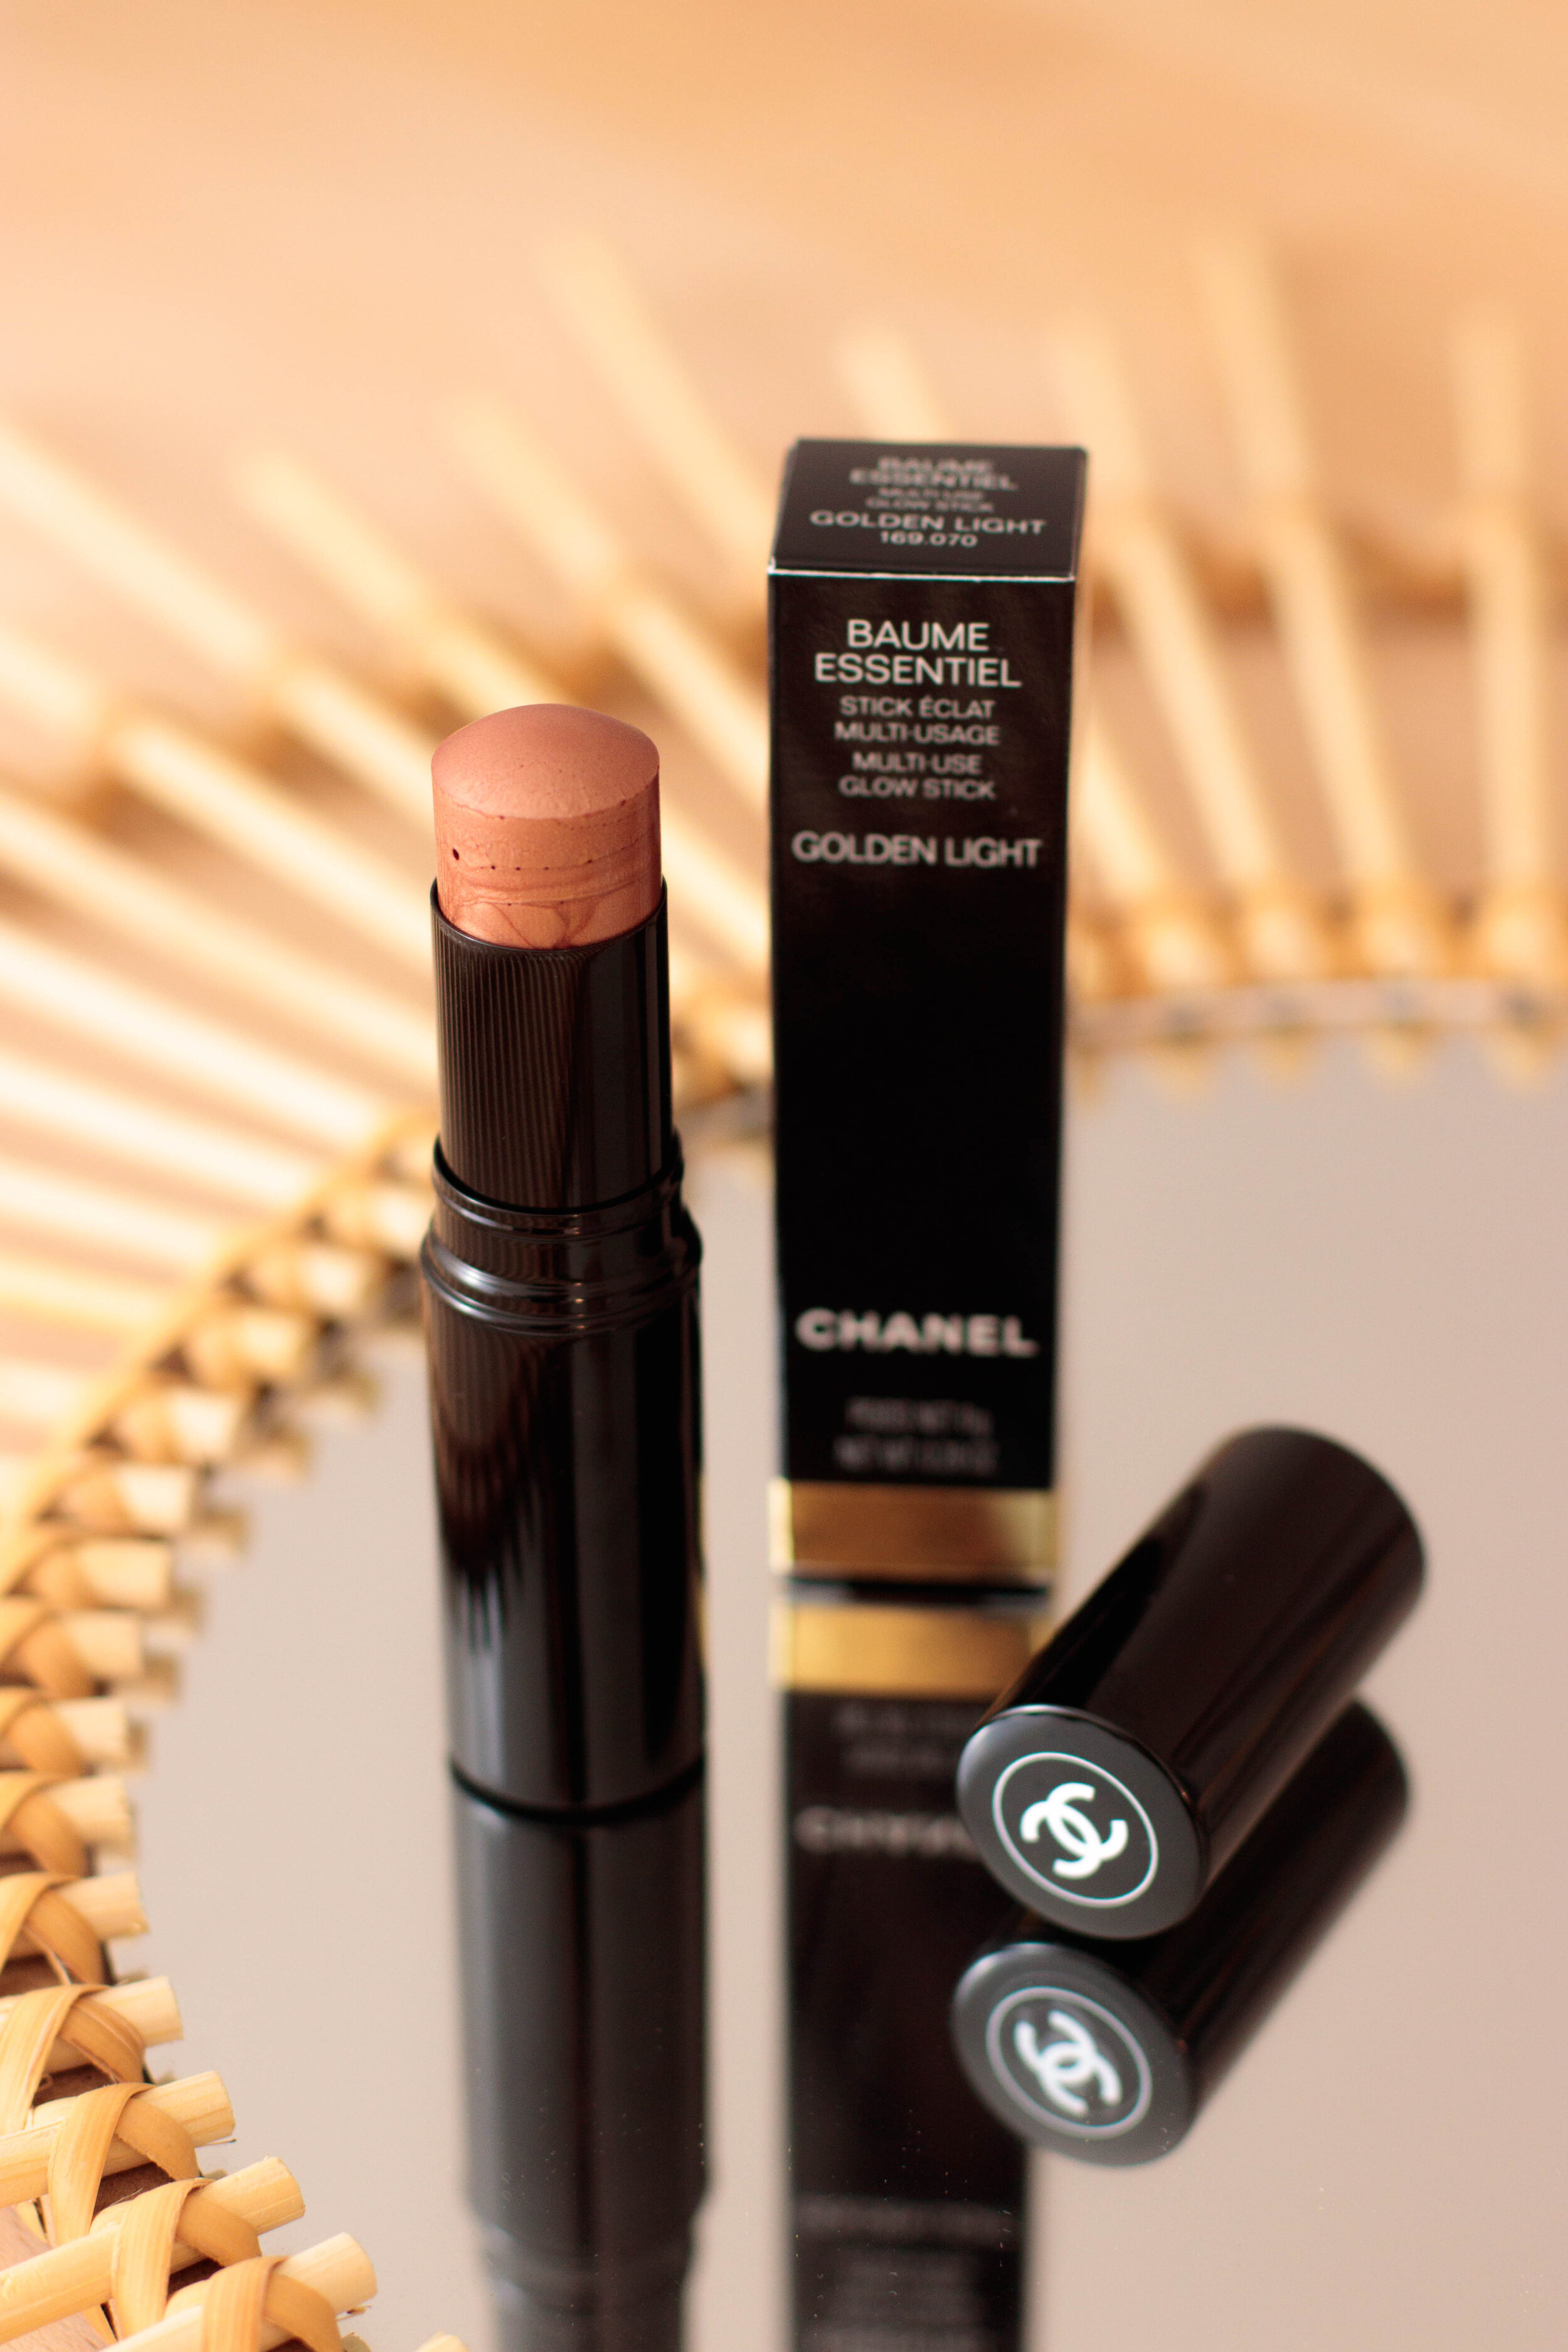 CHANEL BAUME ESSENTIELLE Multi-Use Glow Stick - Reviews